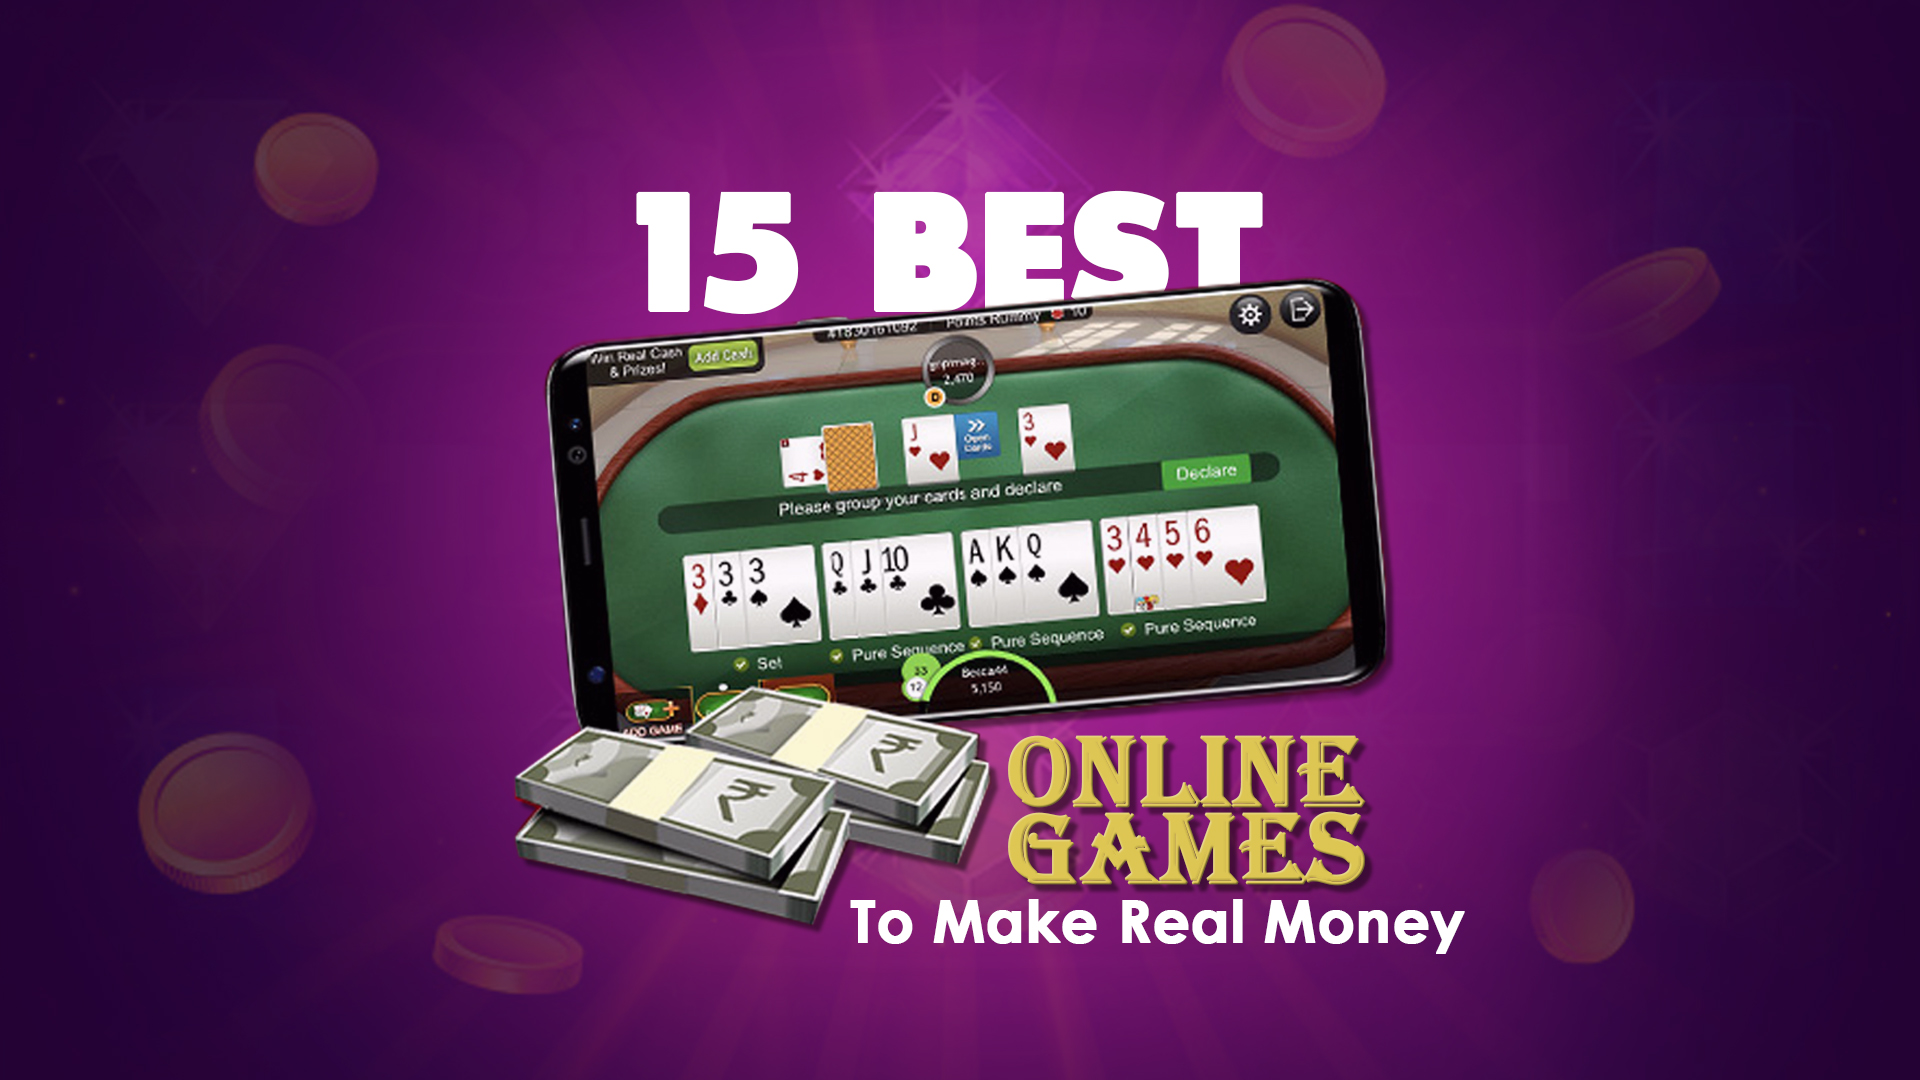 Online Games To Make Real Money